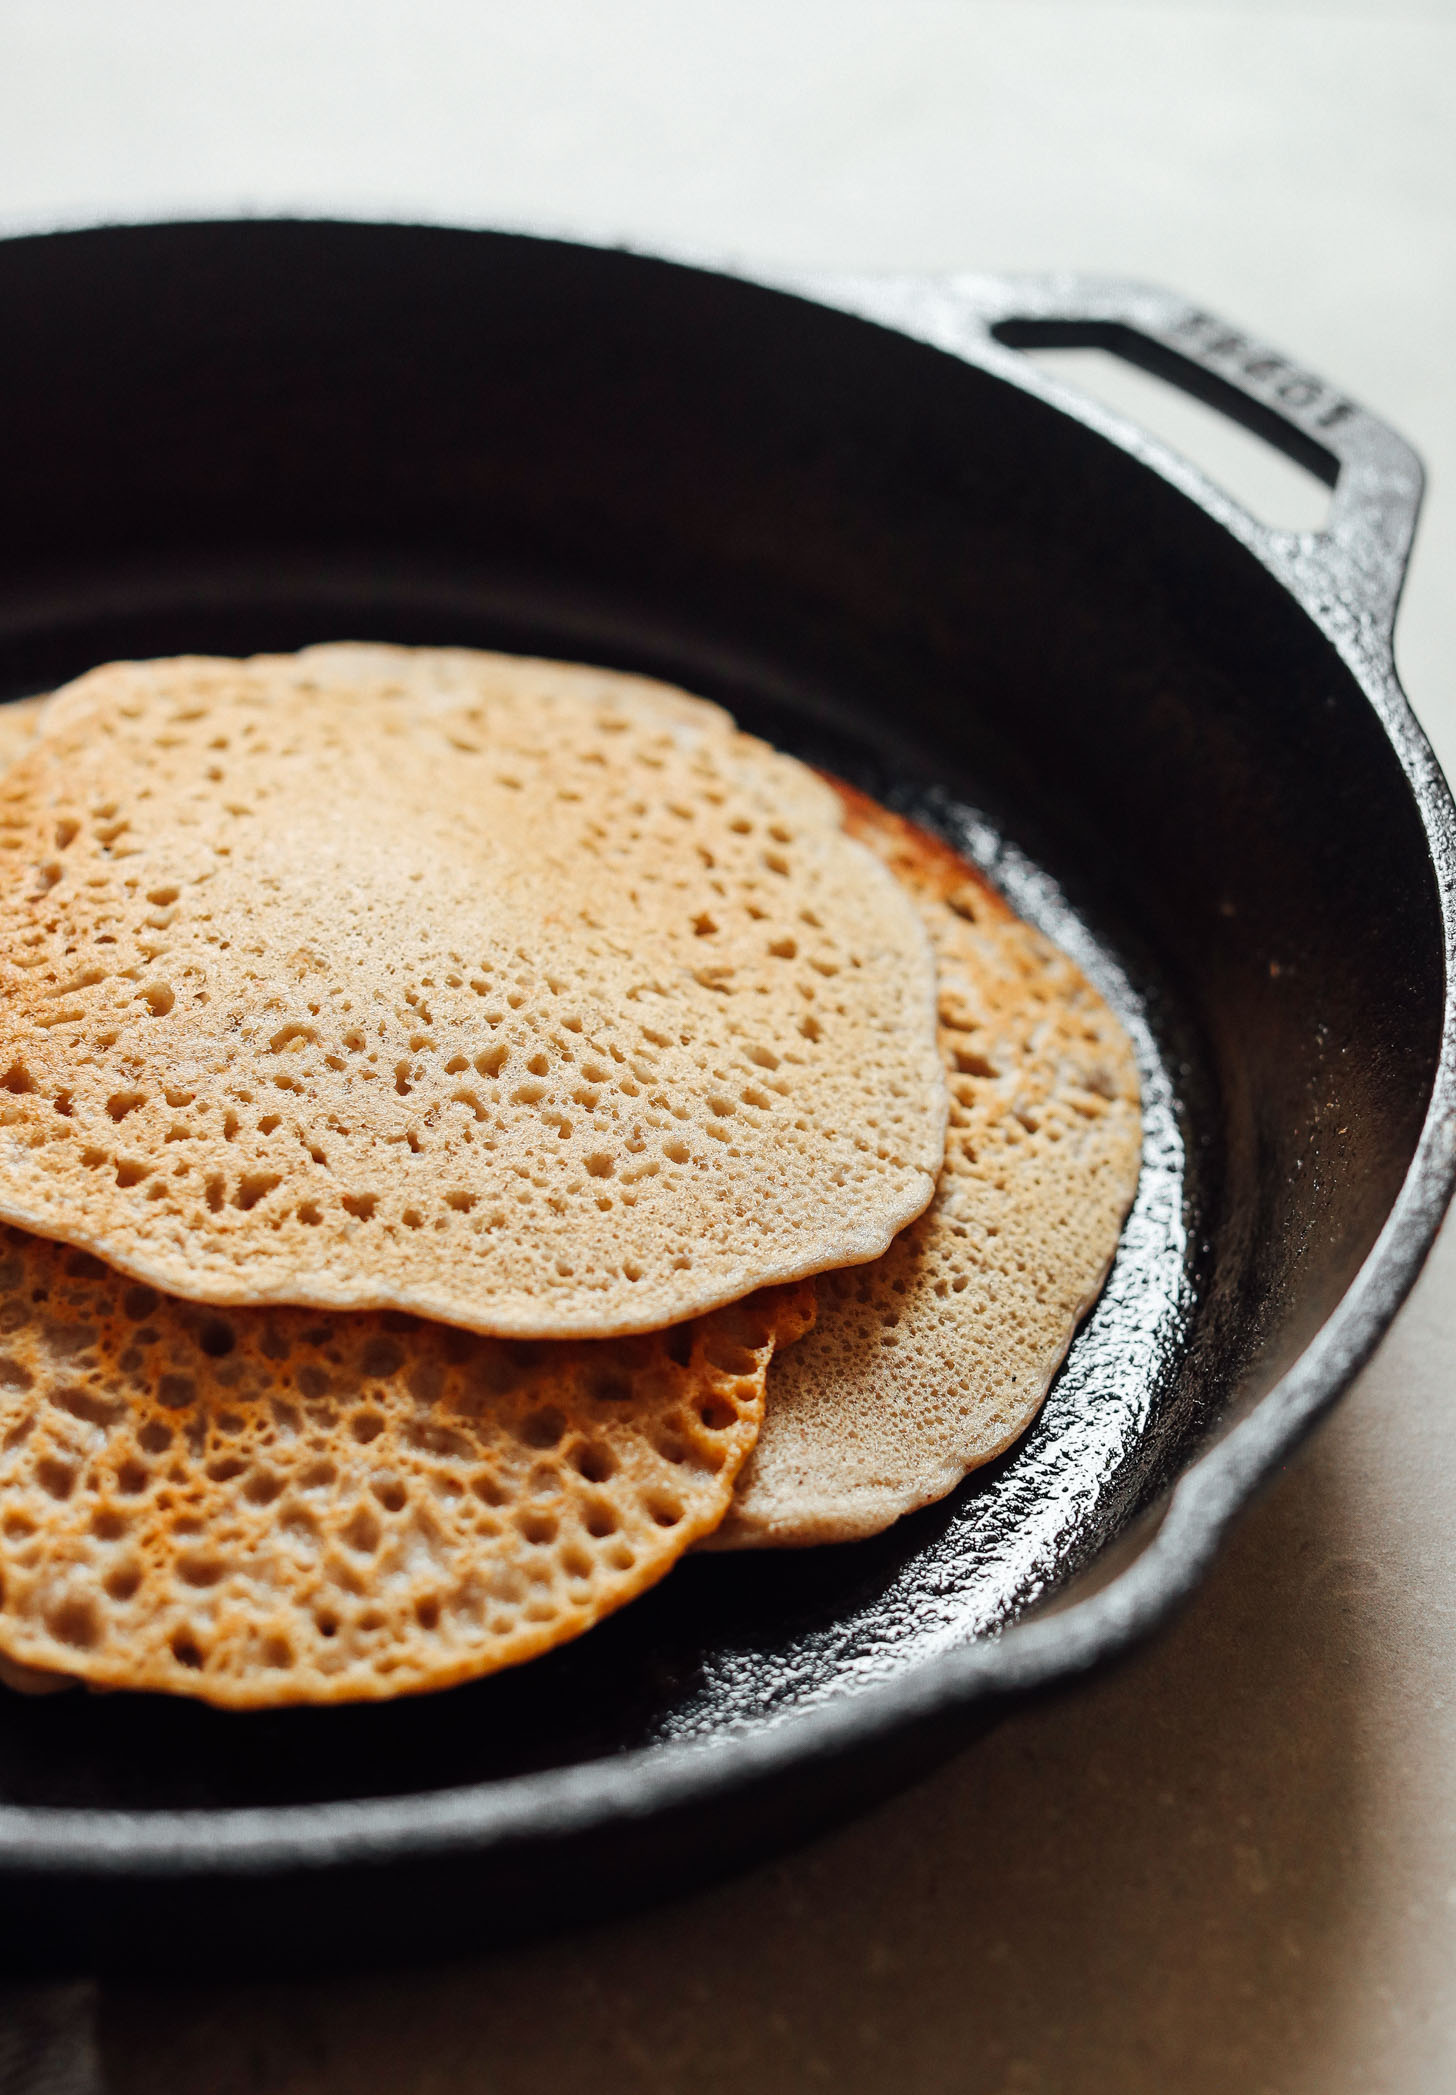 A stack of vegan gluten-free crepes in a cast iron skillet